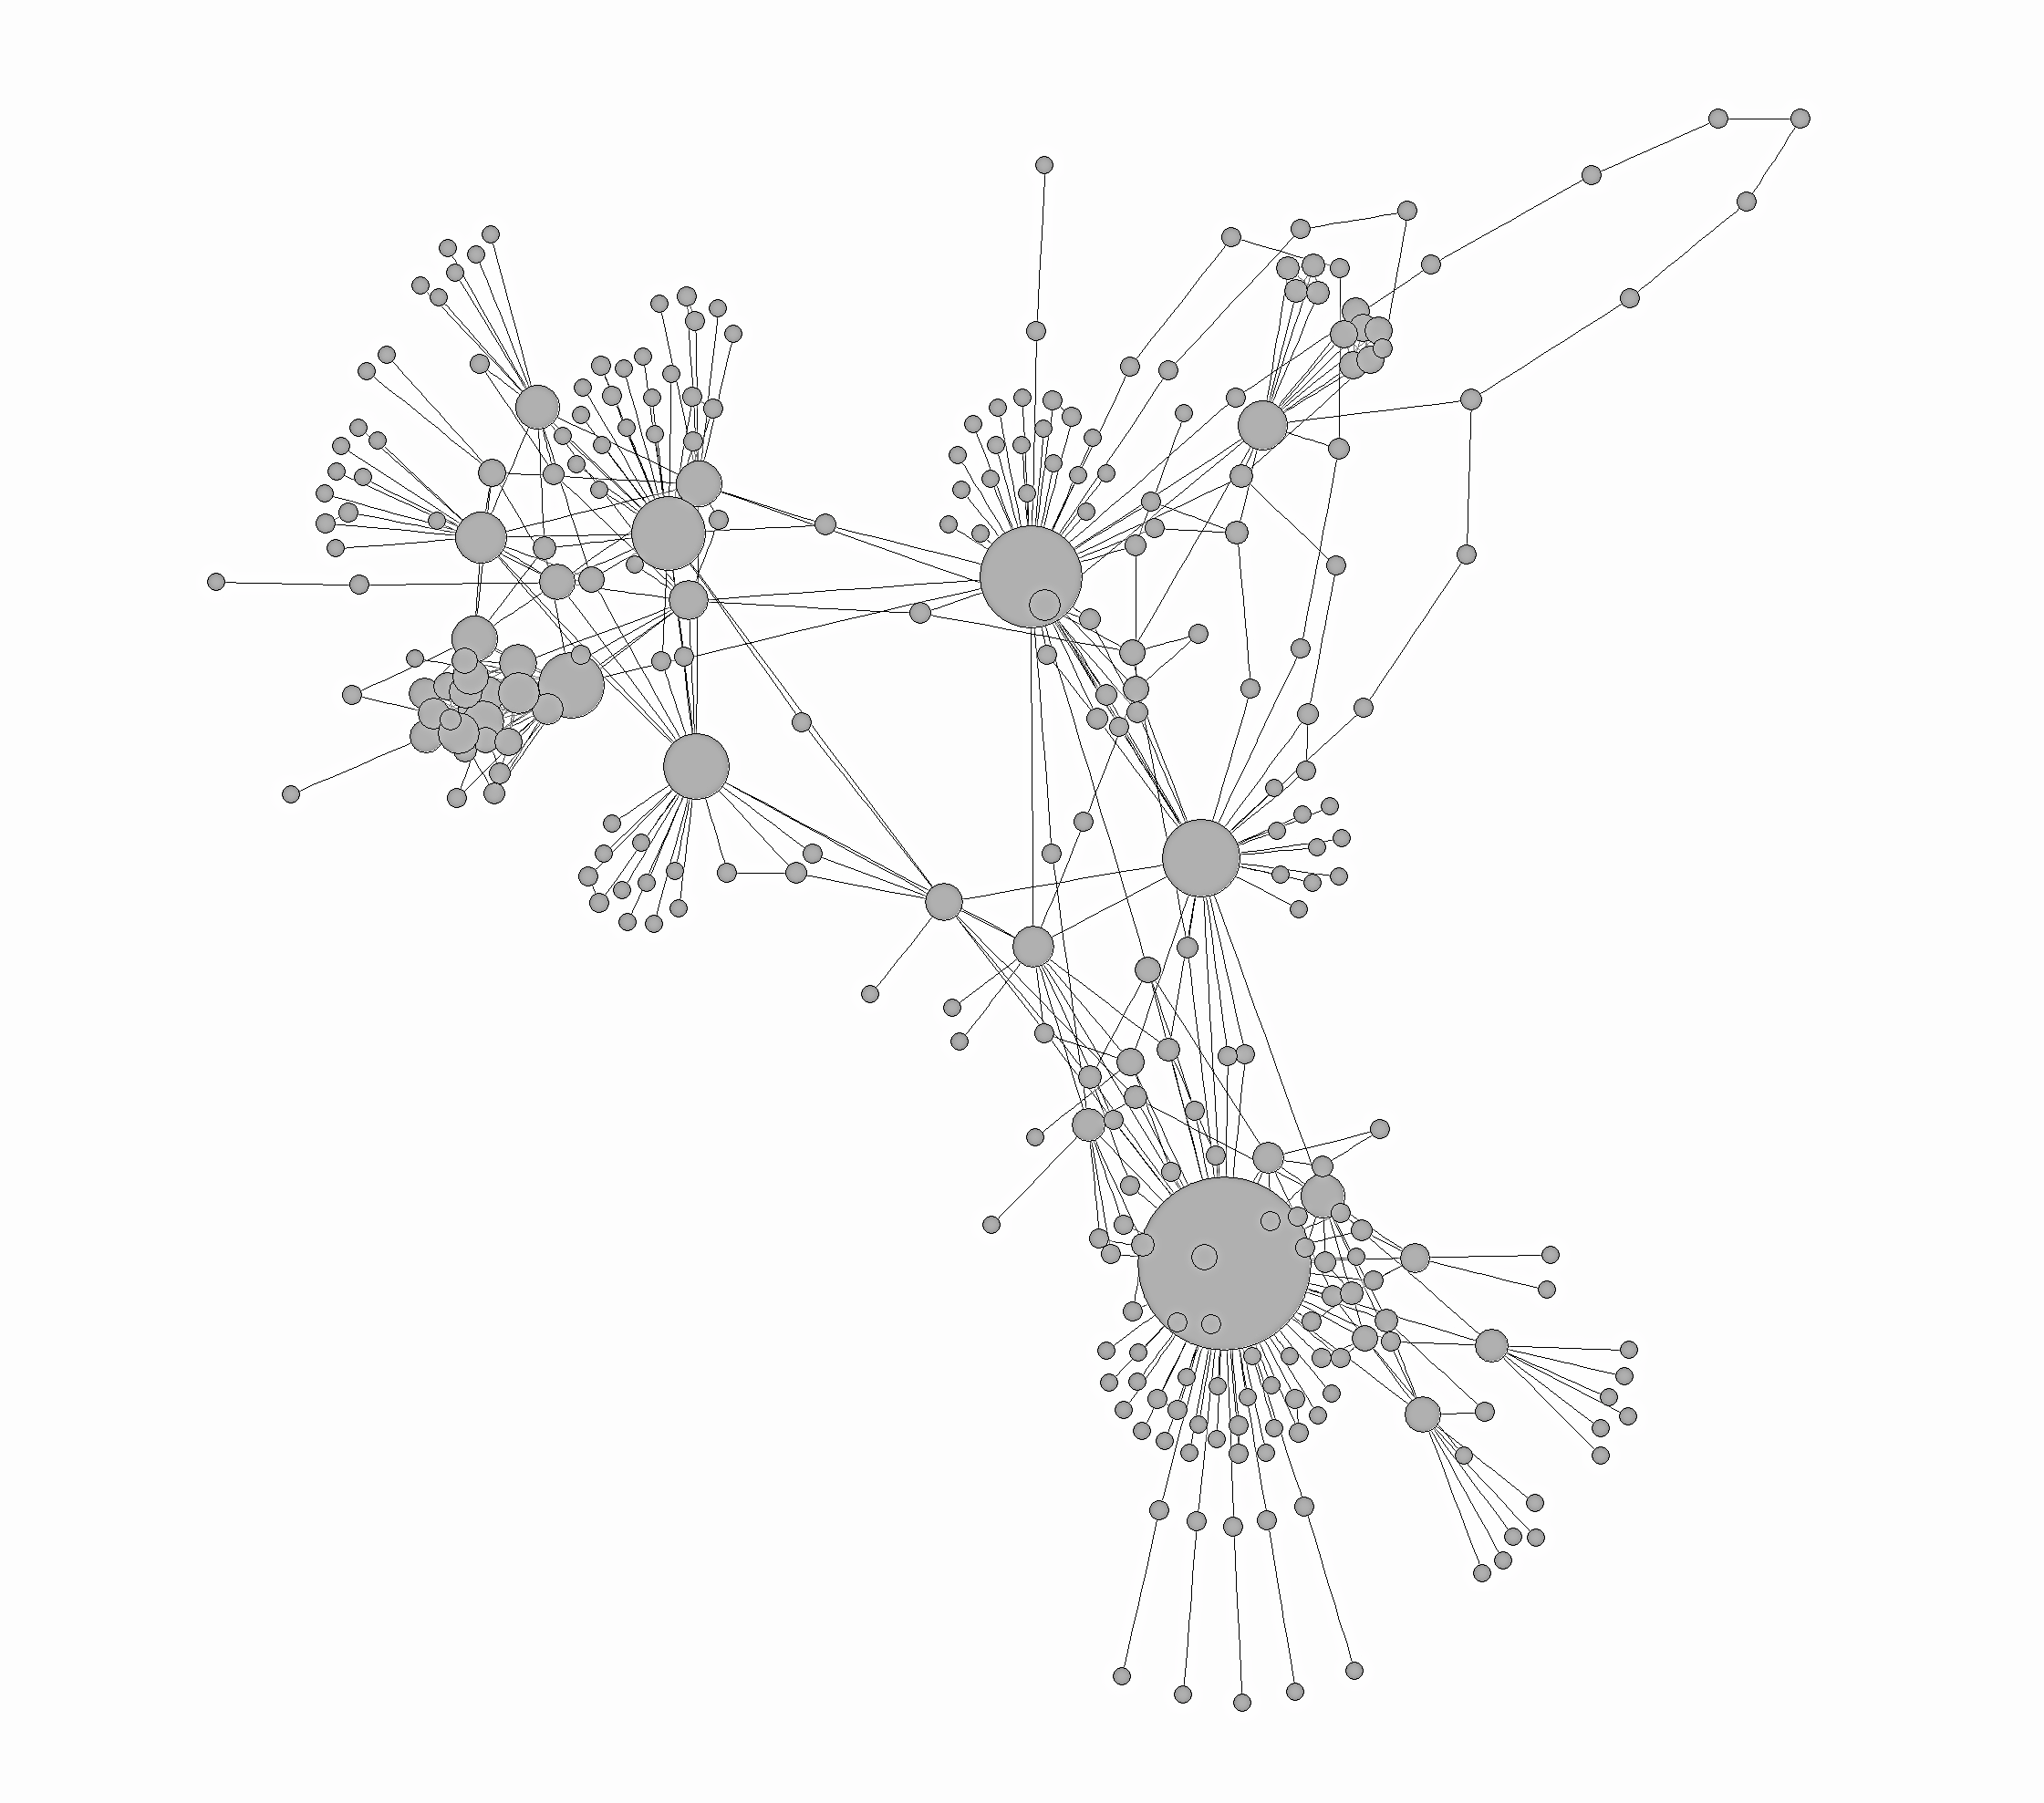 Studying Human Trafficking and Migrant Sex Work through Social Network Analysis: A one-day Workshop